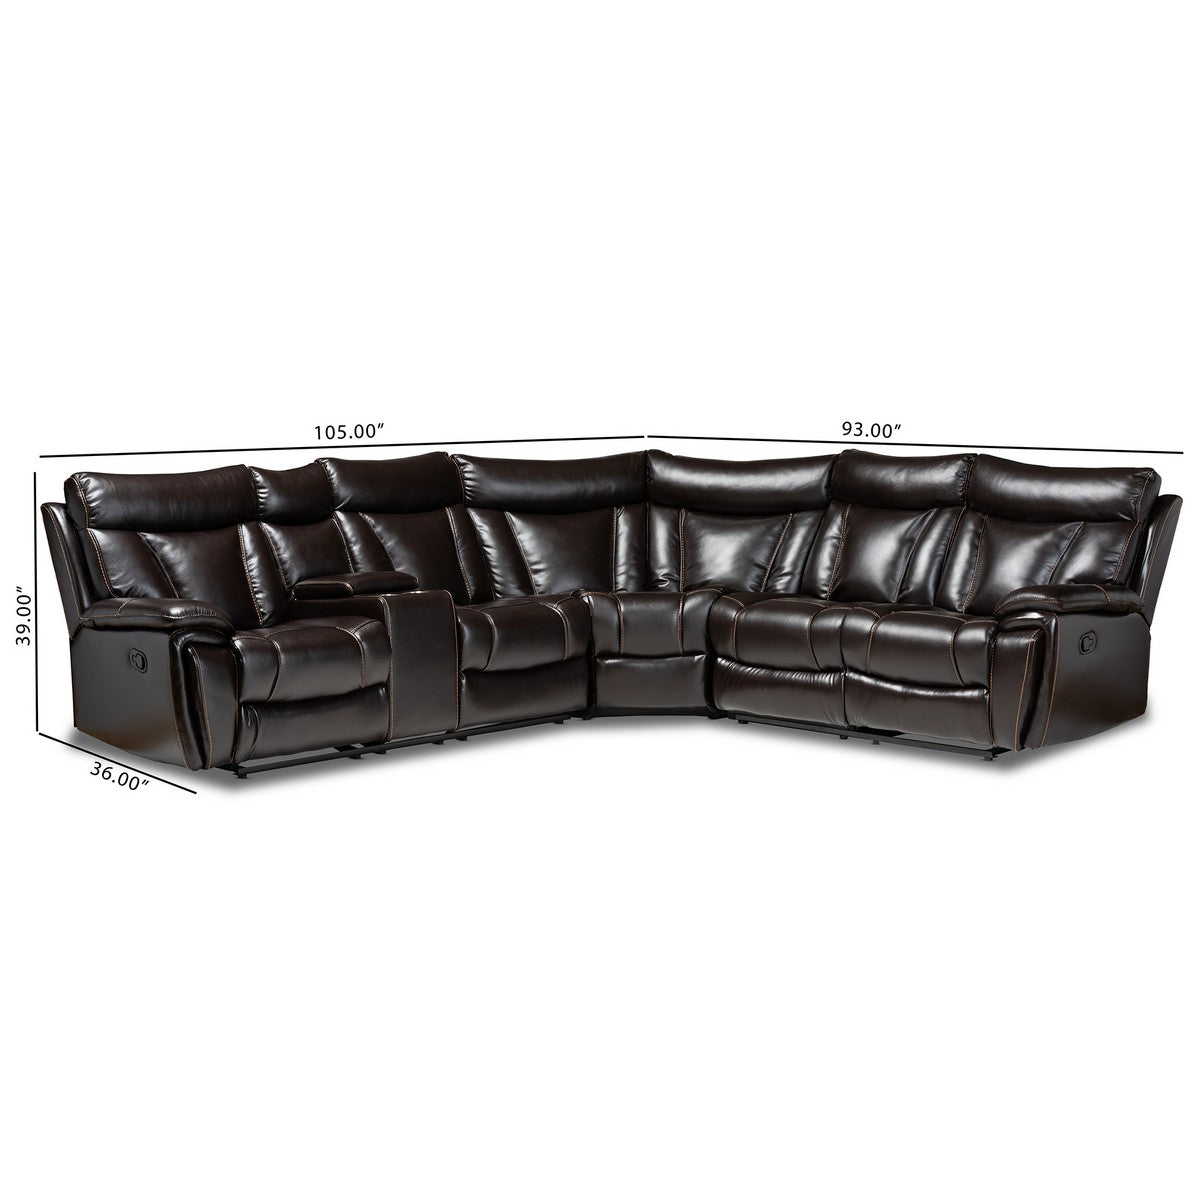 Baxton Studio Lewis Modern and Contemporary Dark Brown Faux Leather Upholstered 6-Piece Reclining Sectional Sofa